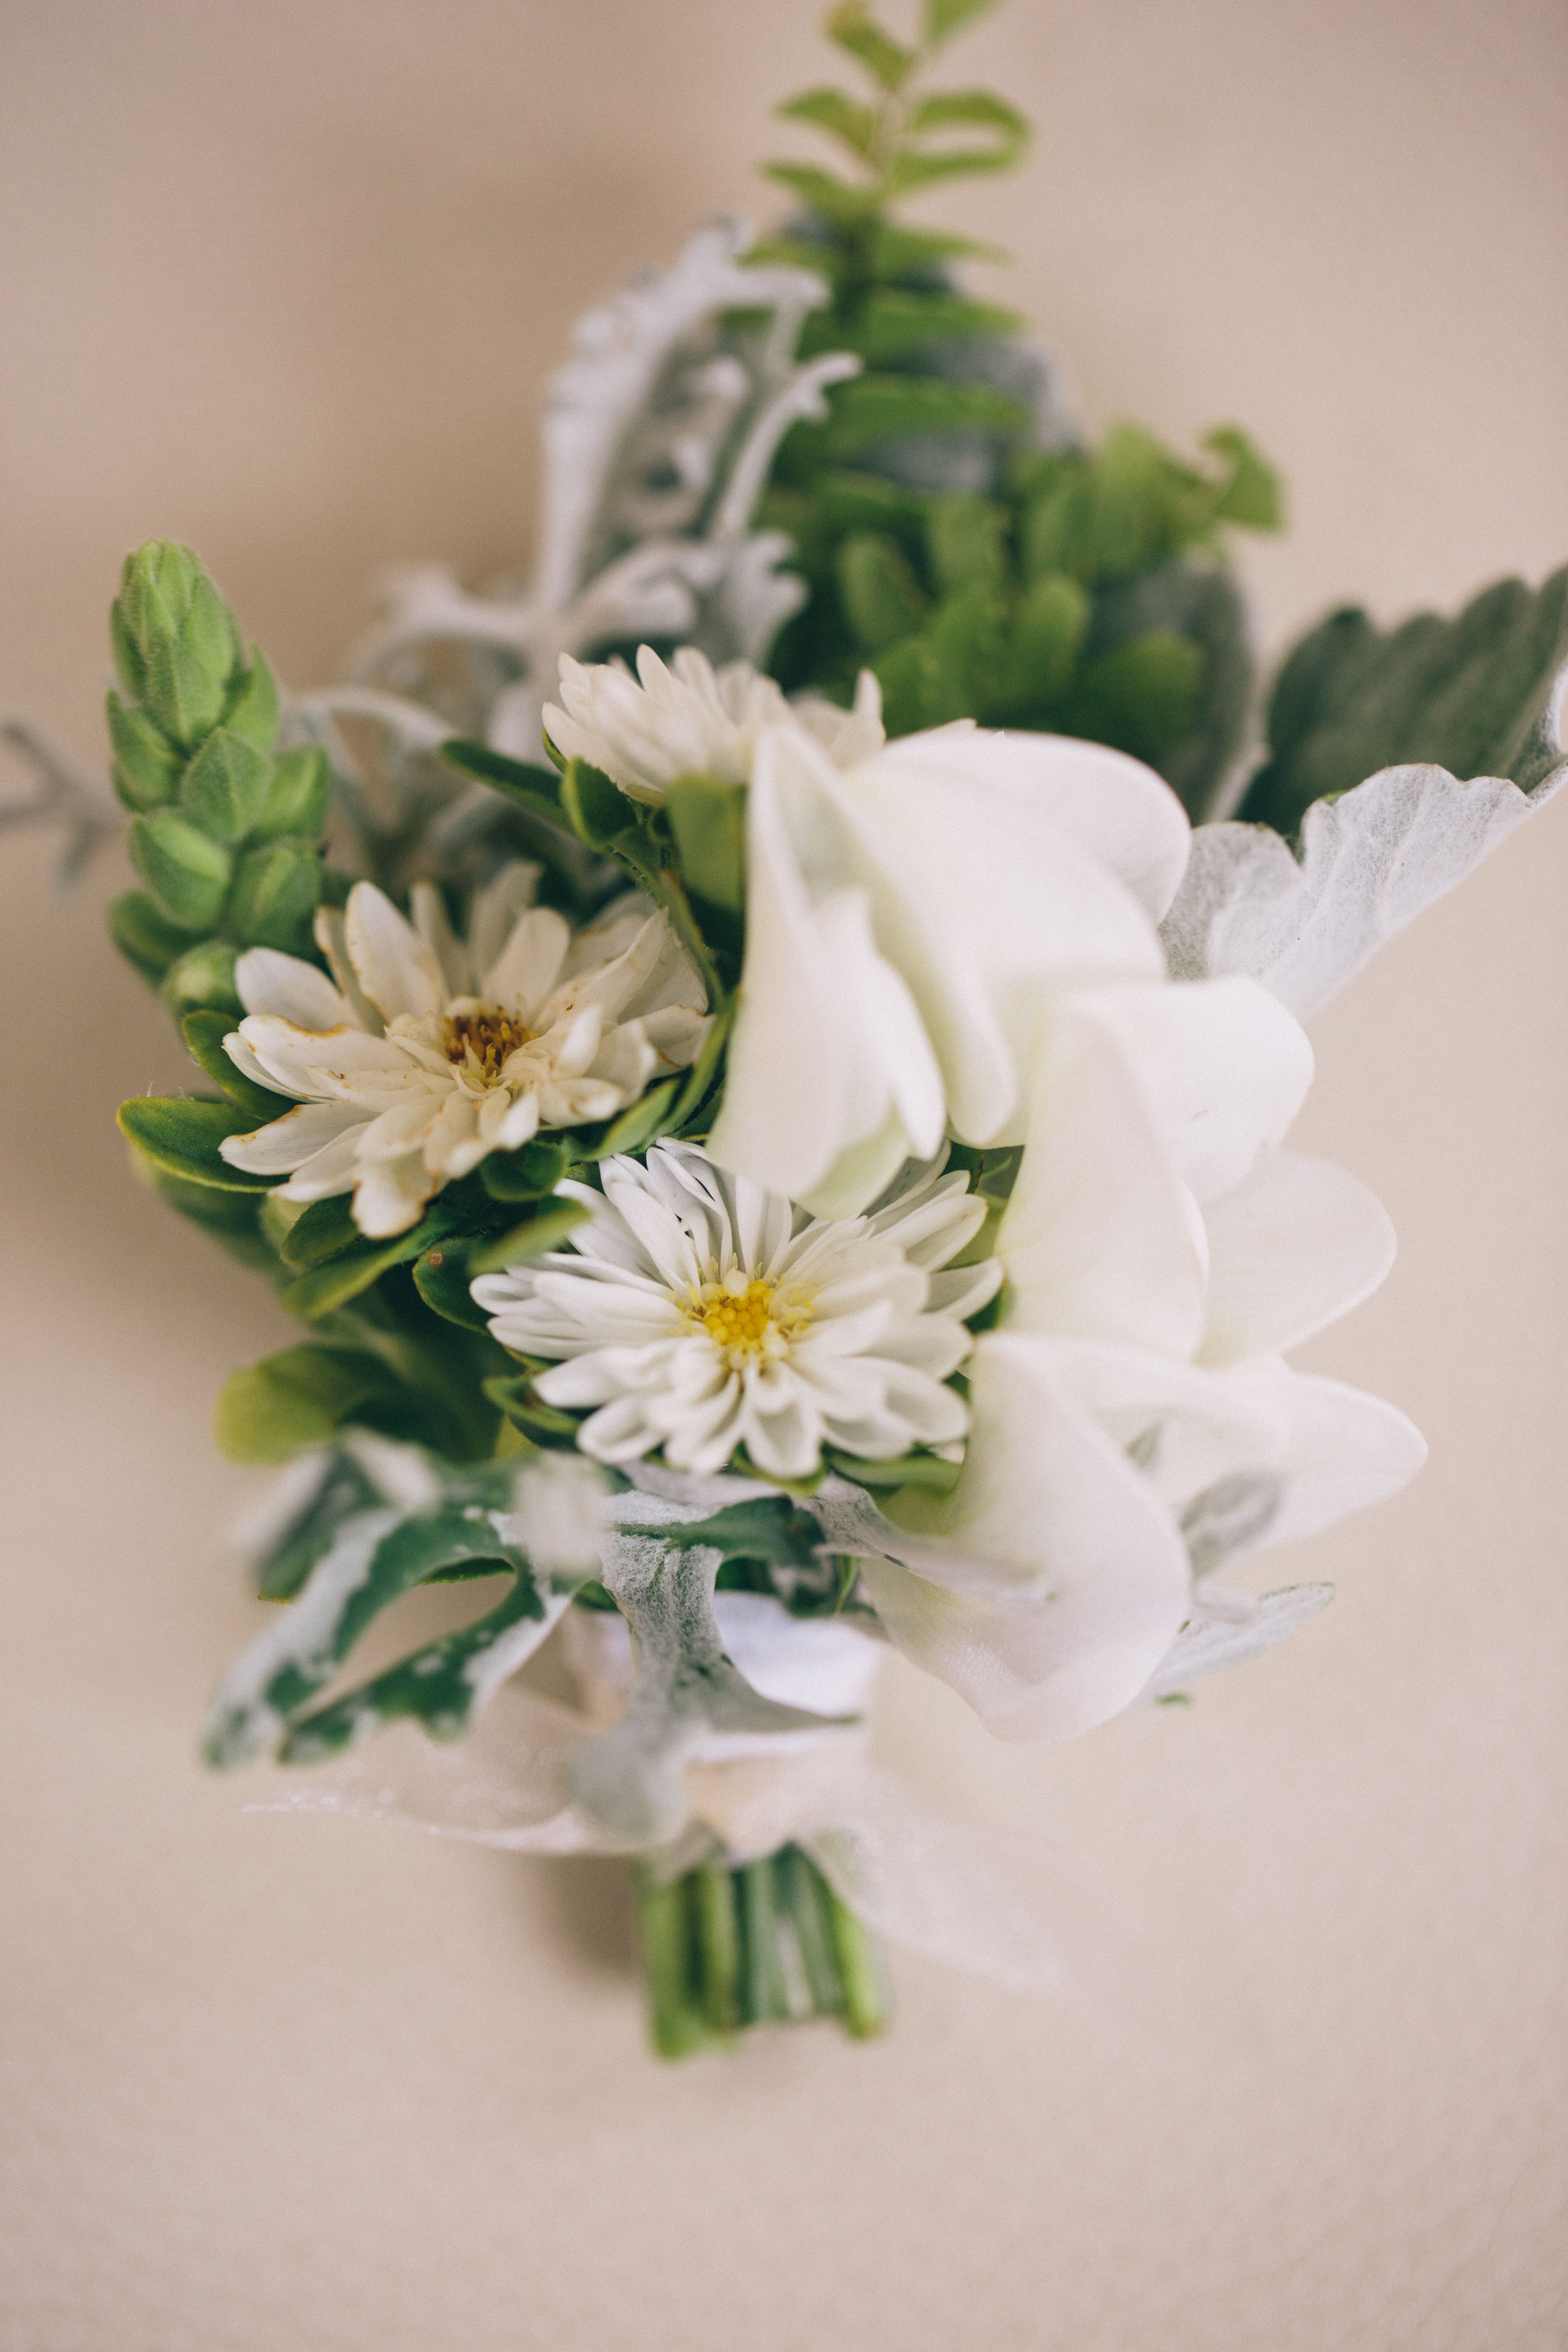 Boutonniere made of white flowers and summer greenery